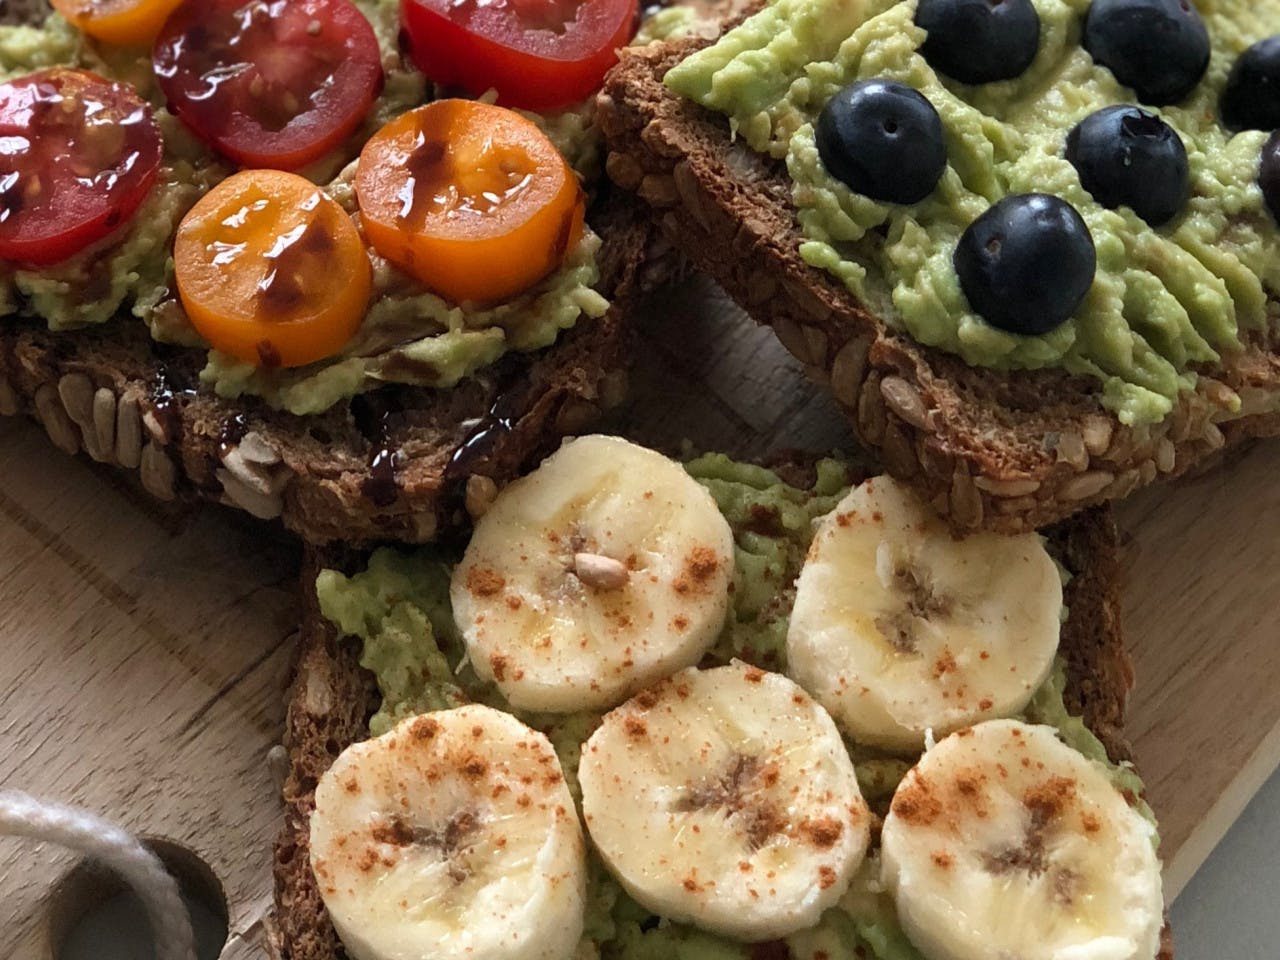 Avocado toast with tasty toppings